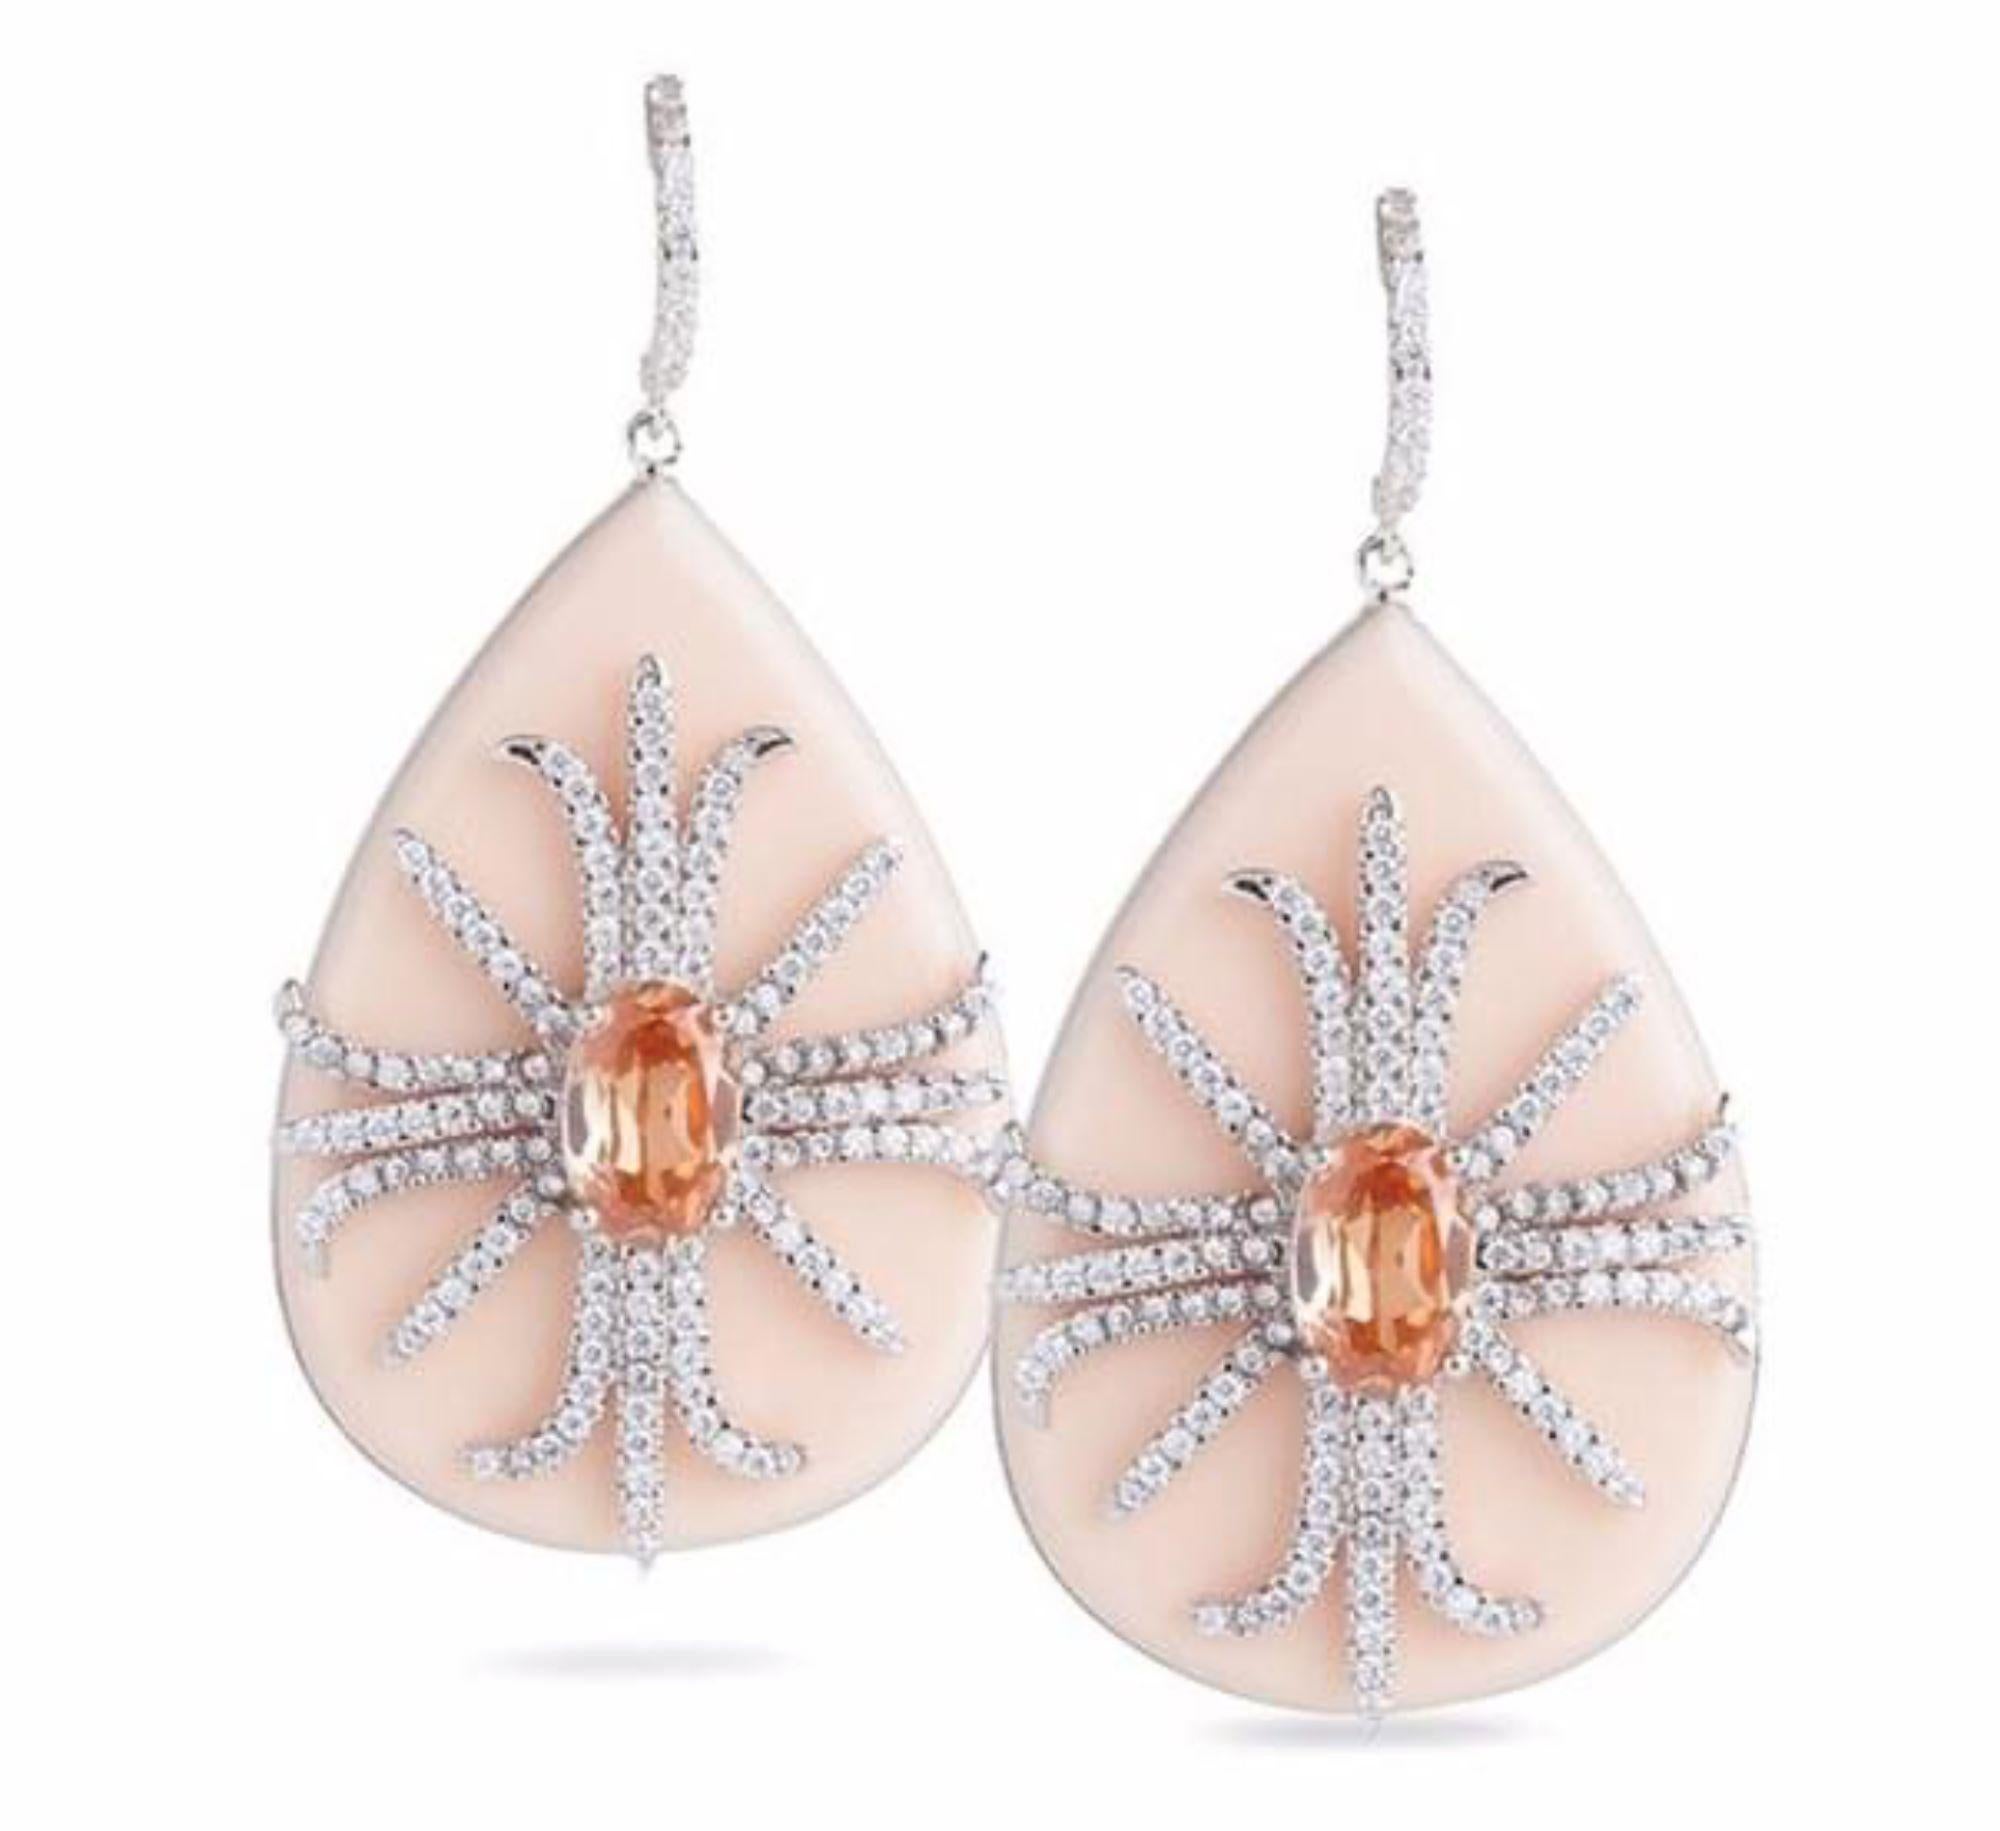 Miriam Salat Red Carpet Candy Pink Resin and Topaz Drop Earrings 3